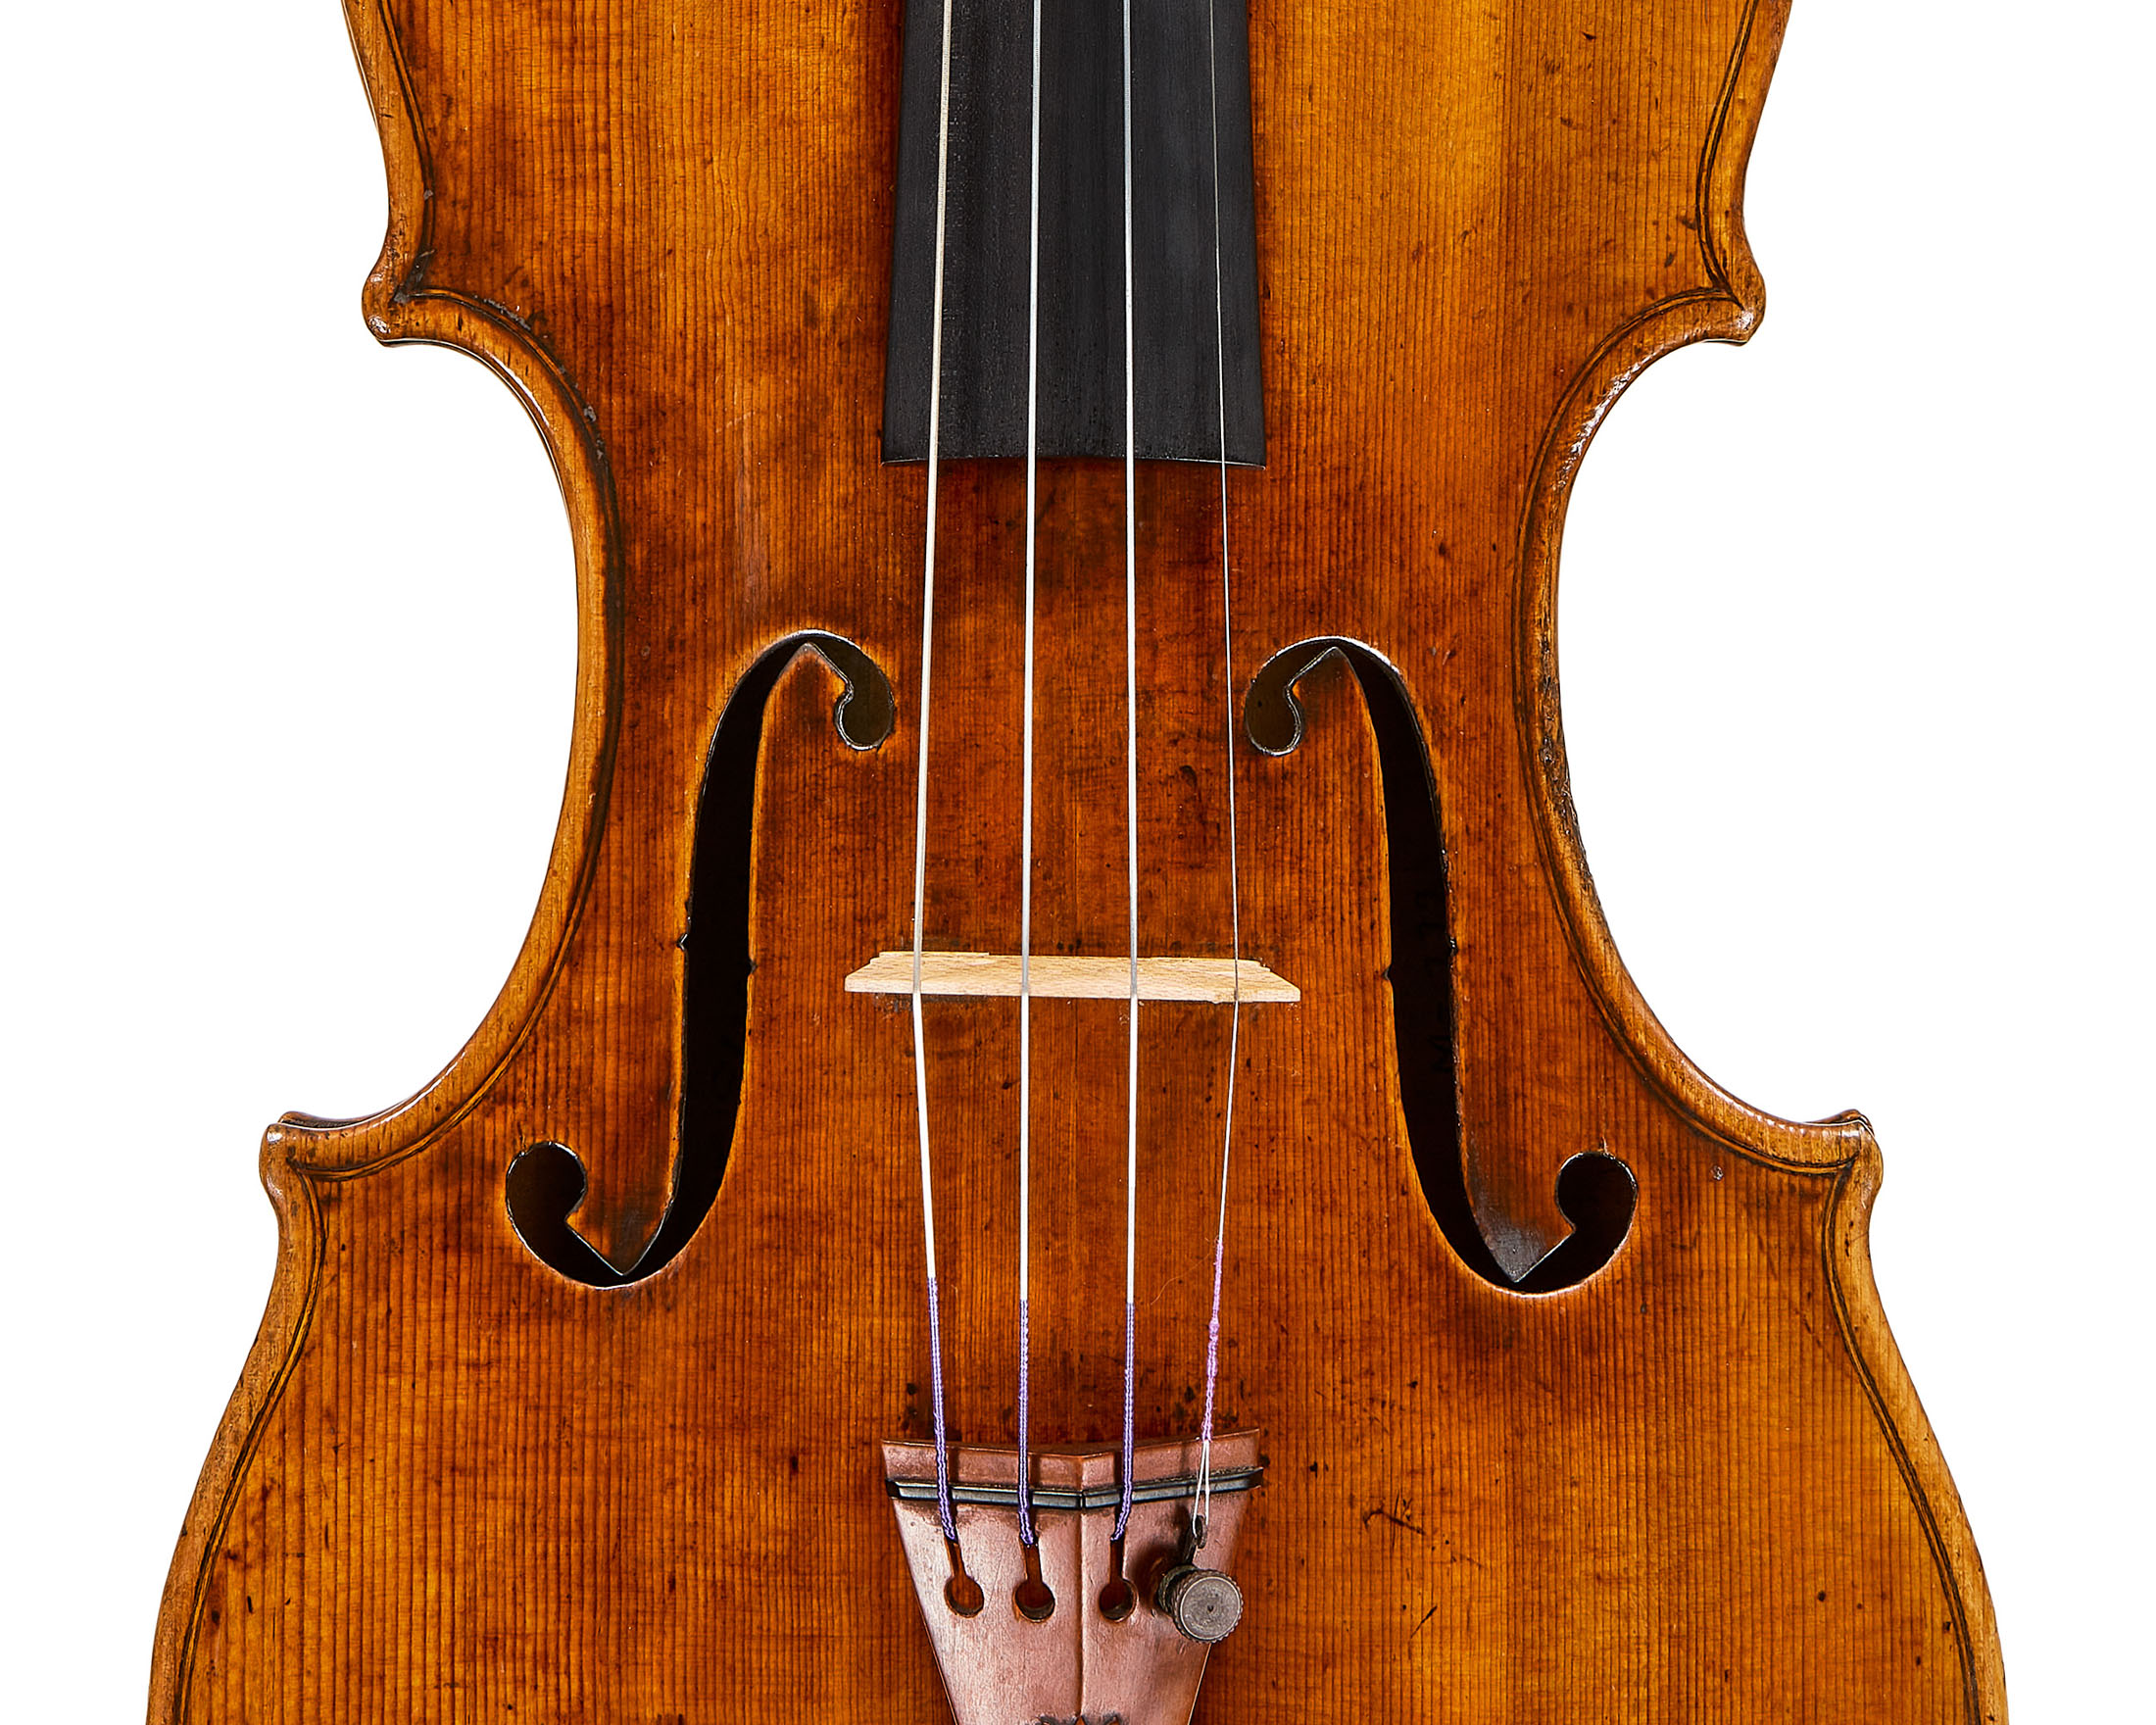 Playing a Guarneri The Sound $10 Musical Instrument History - Bloomberg